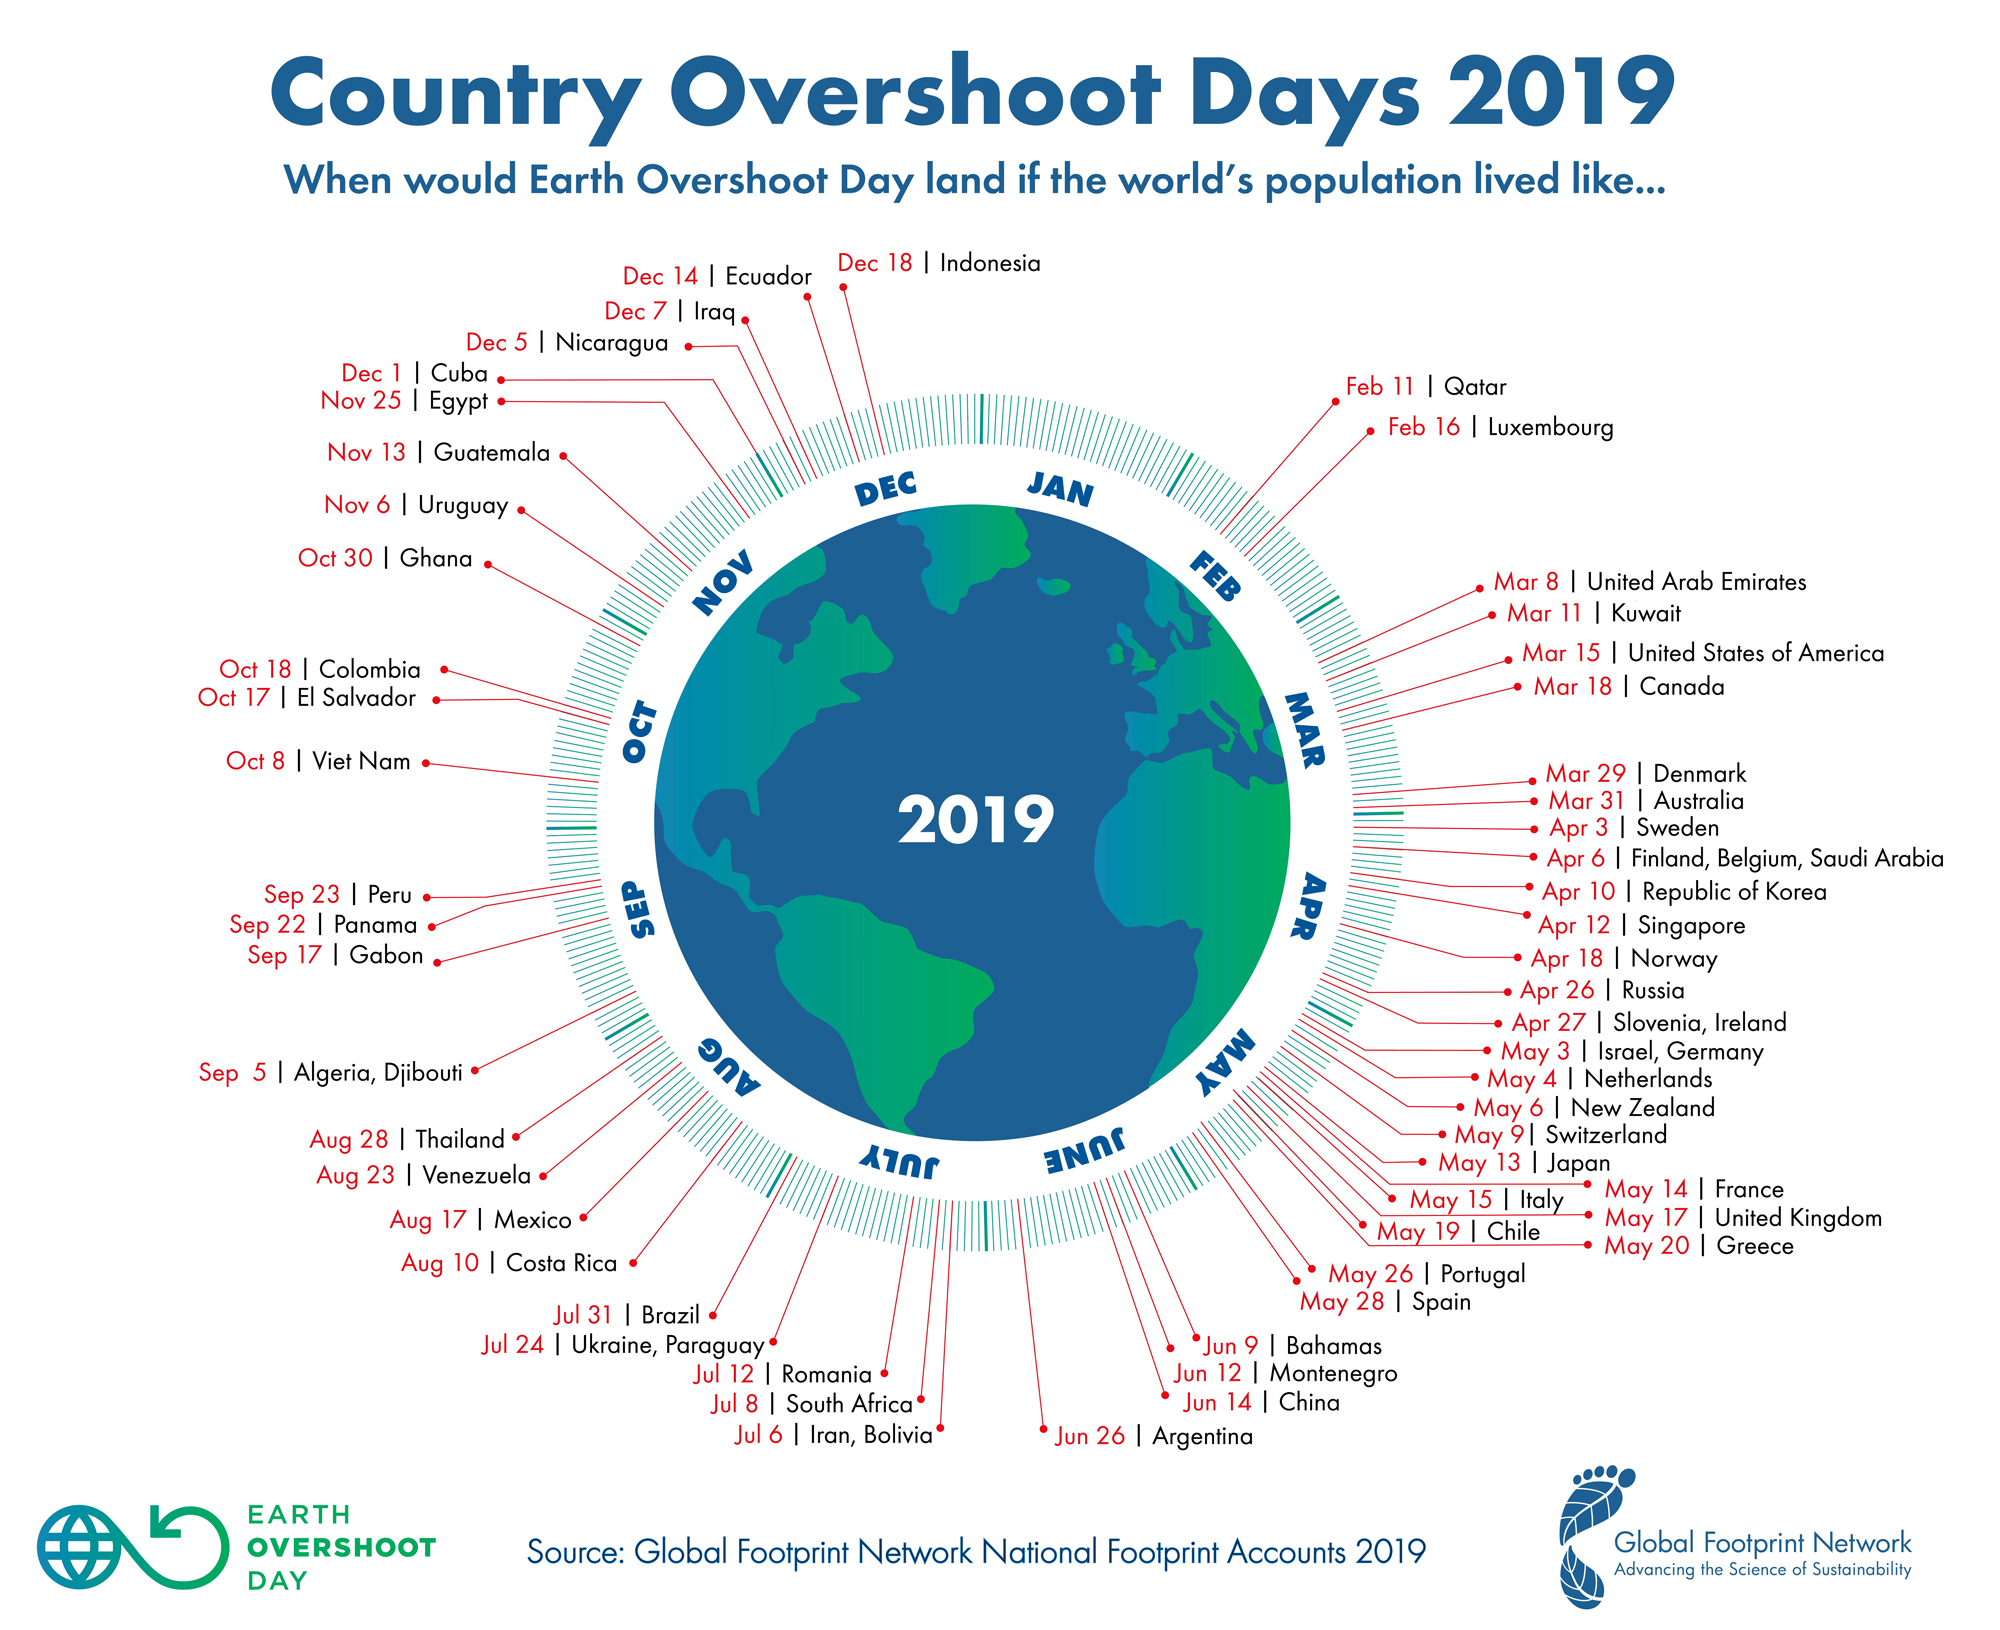 Country overshoot days